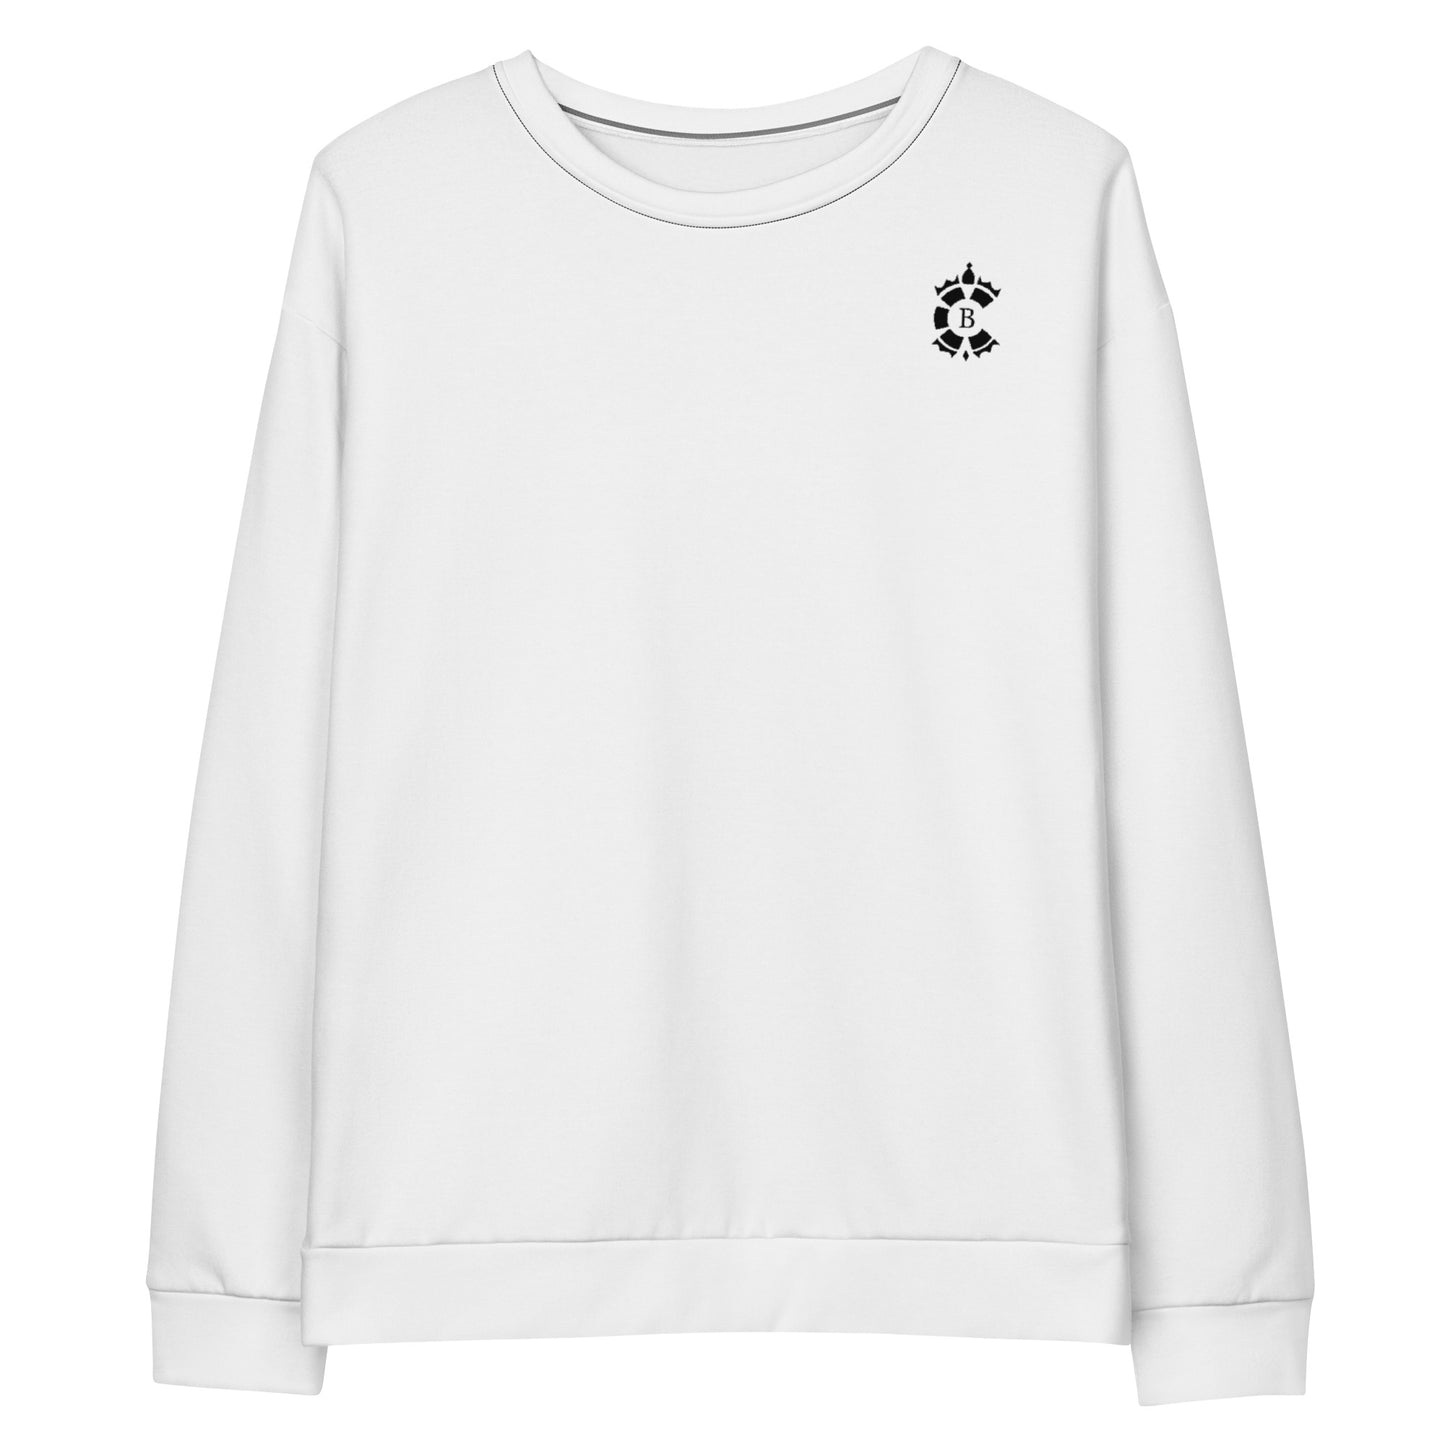 CONTRABRANDED Logo Sweater Black on White